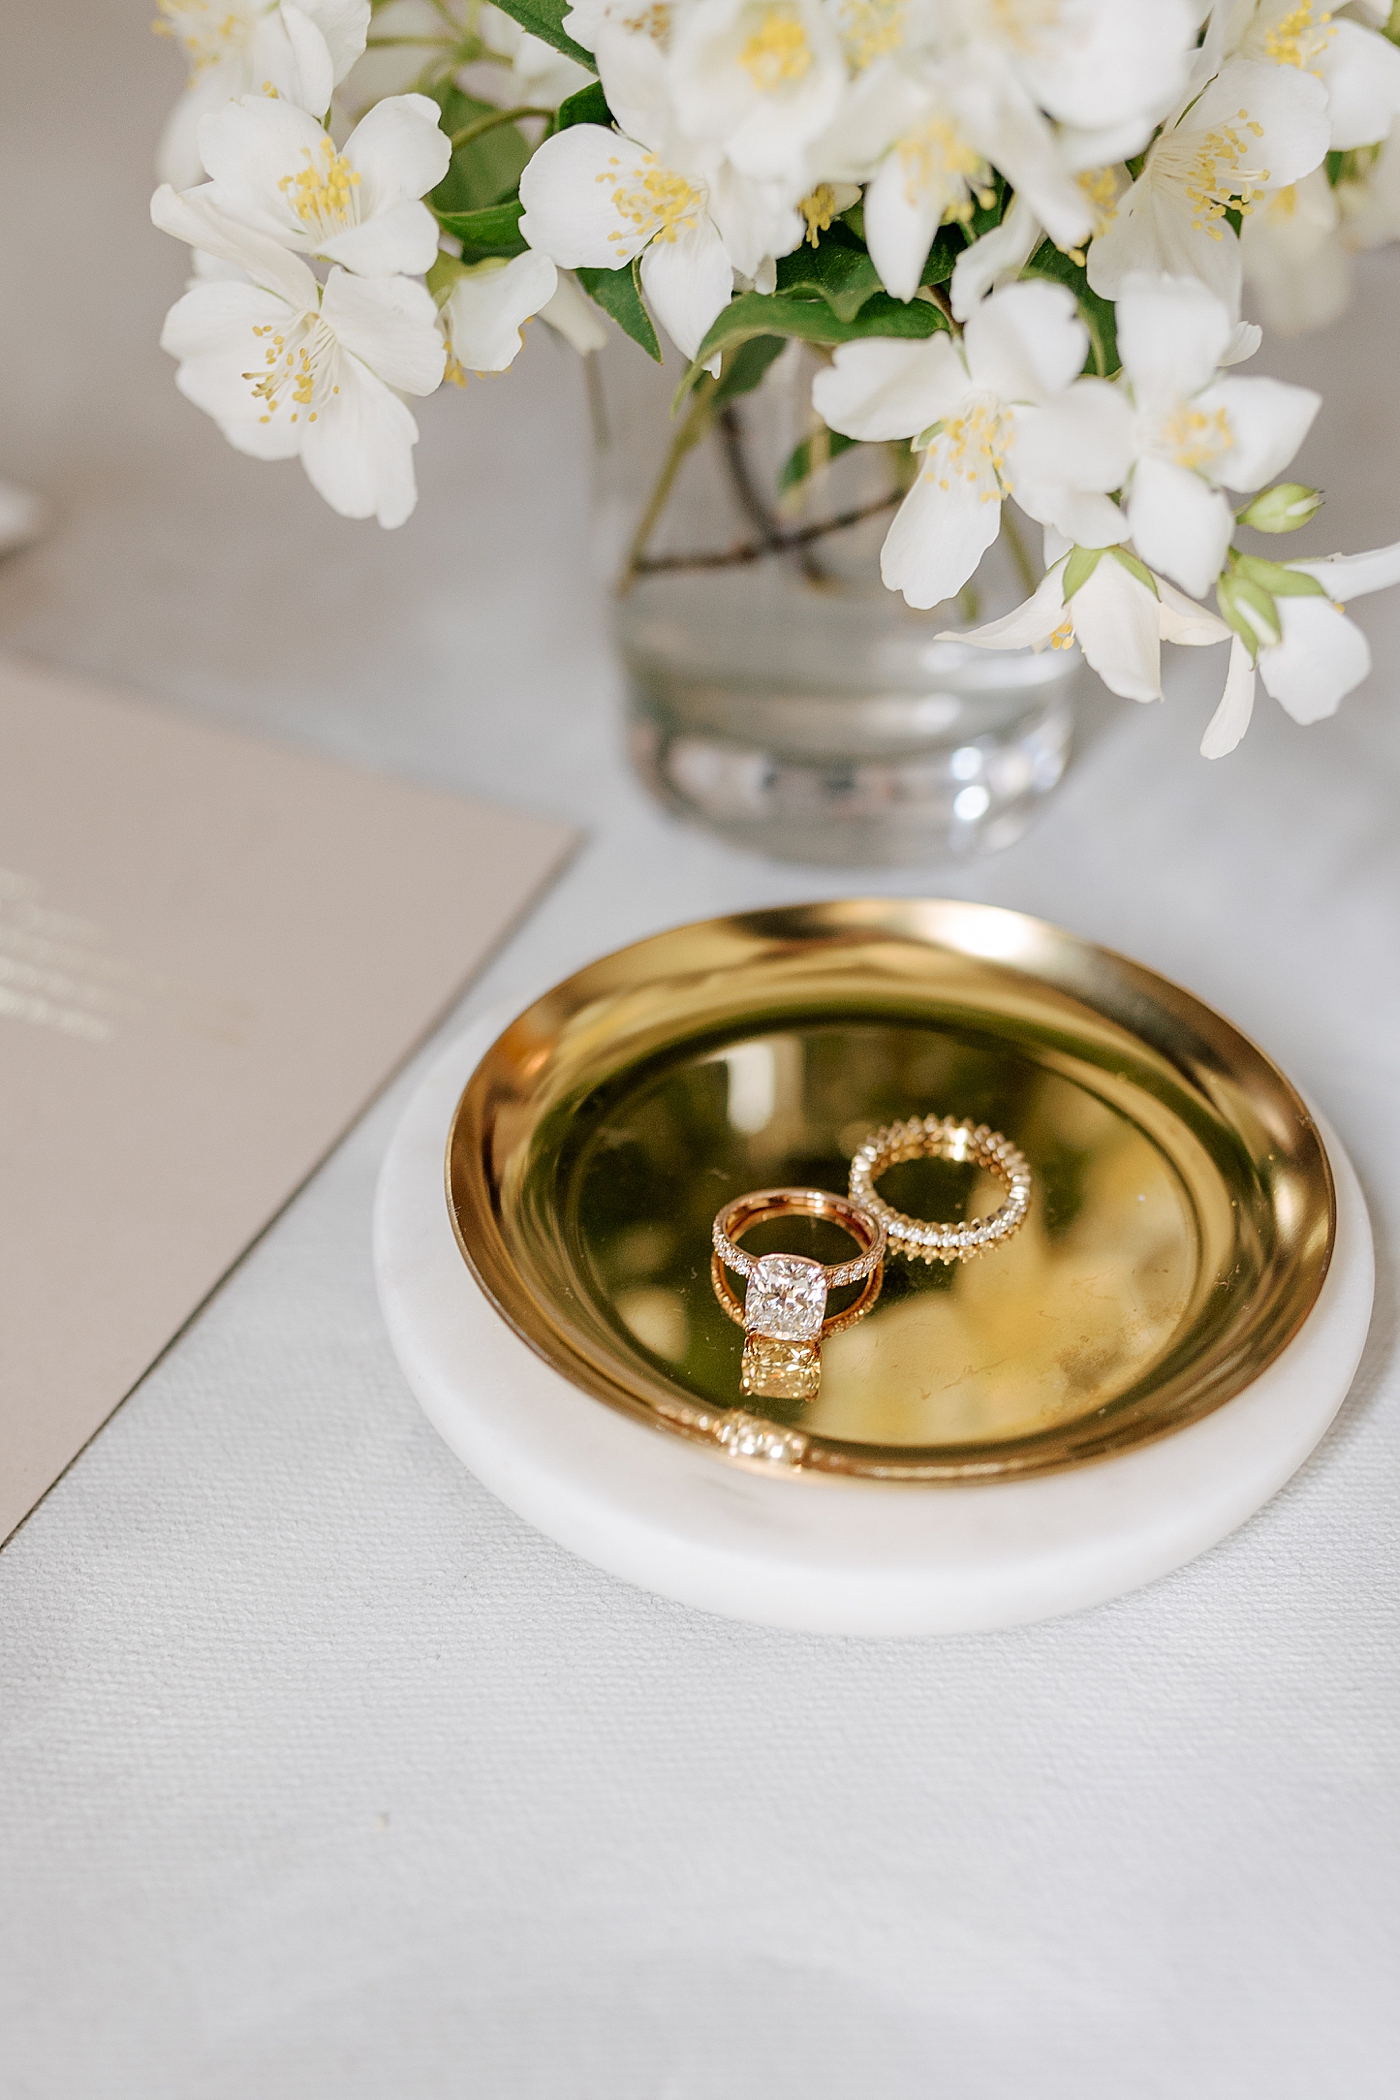 Gold ring dish with rings and white flowers in a vase | Photo by NYC Wedding Photographer Hope Helmuth 